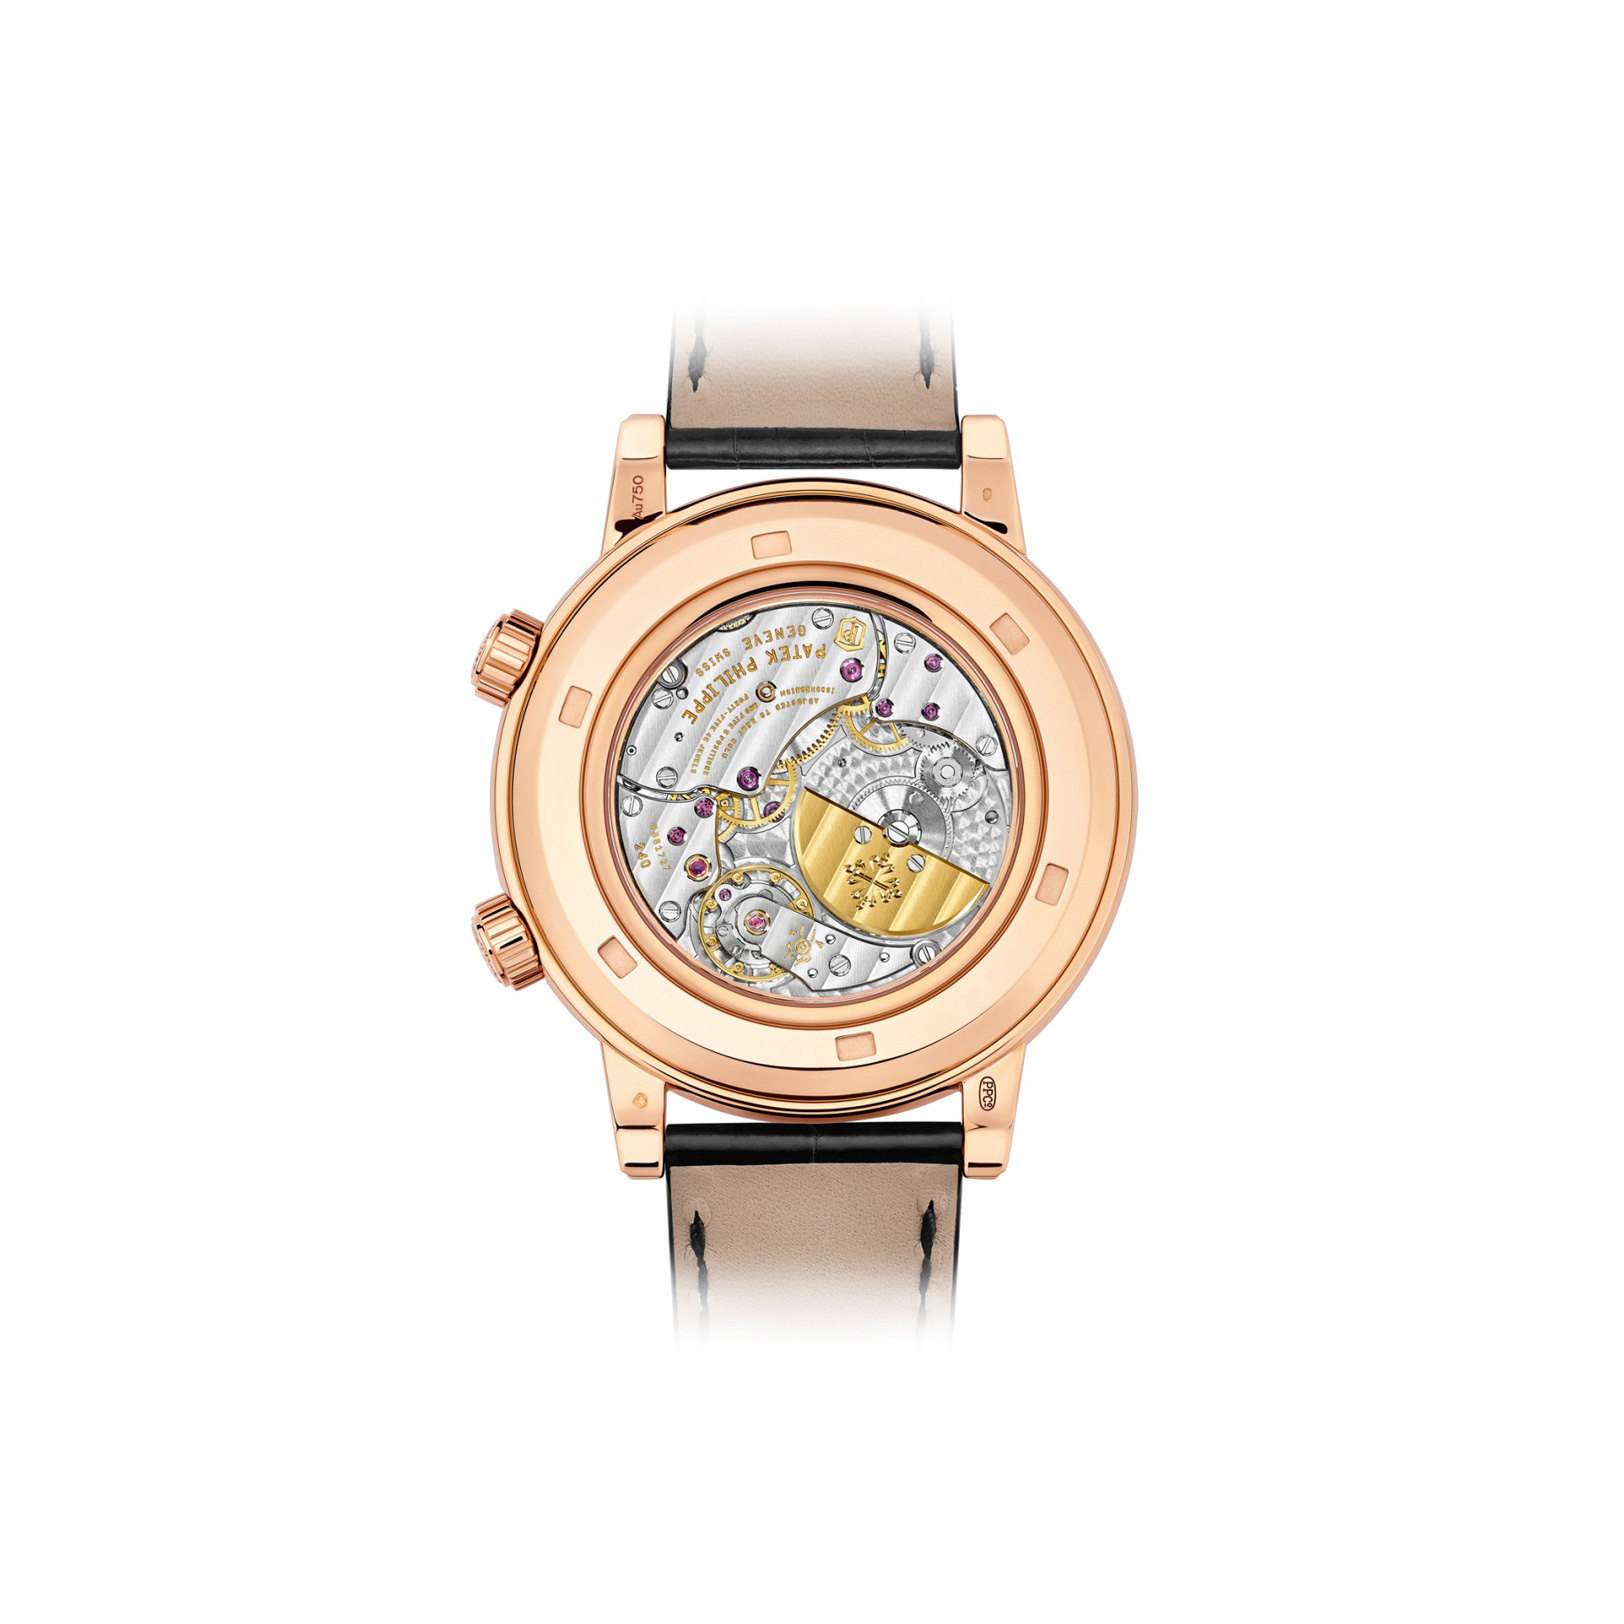 Grand Complications Diamond & Rose Gold Celestial gallery 1